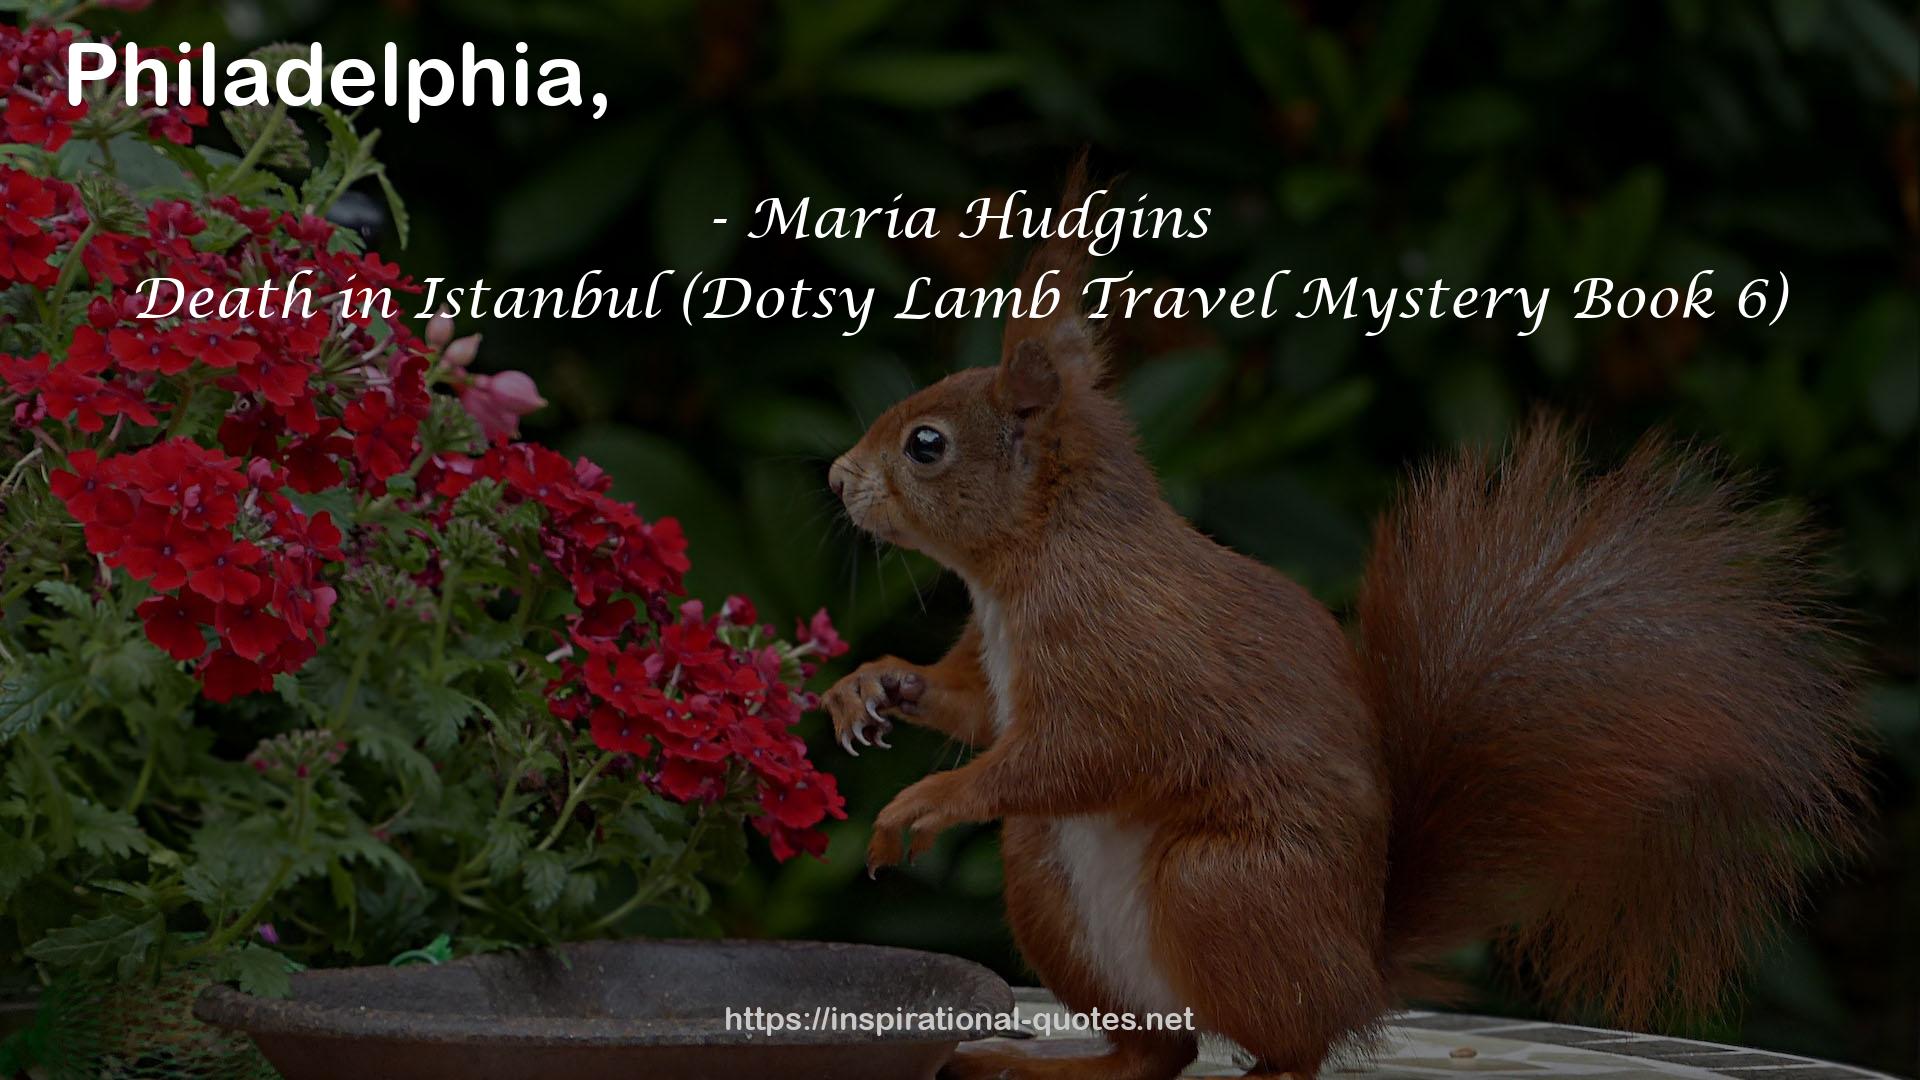 Death in Istanbul (Dotsy Lamb Travel Mystery Book 6) QUOTES